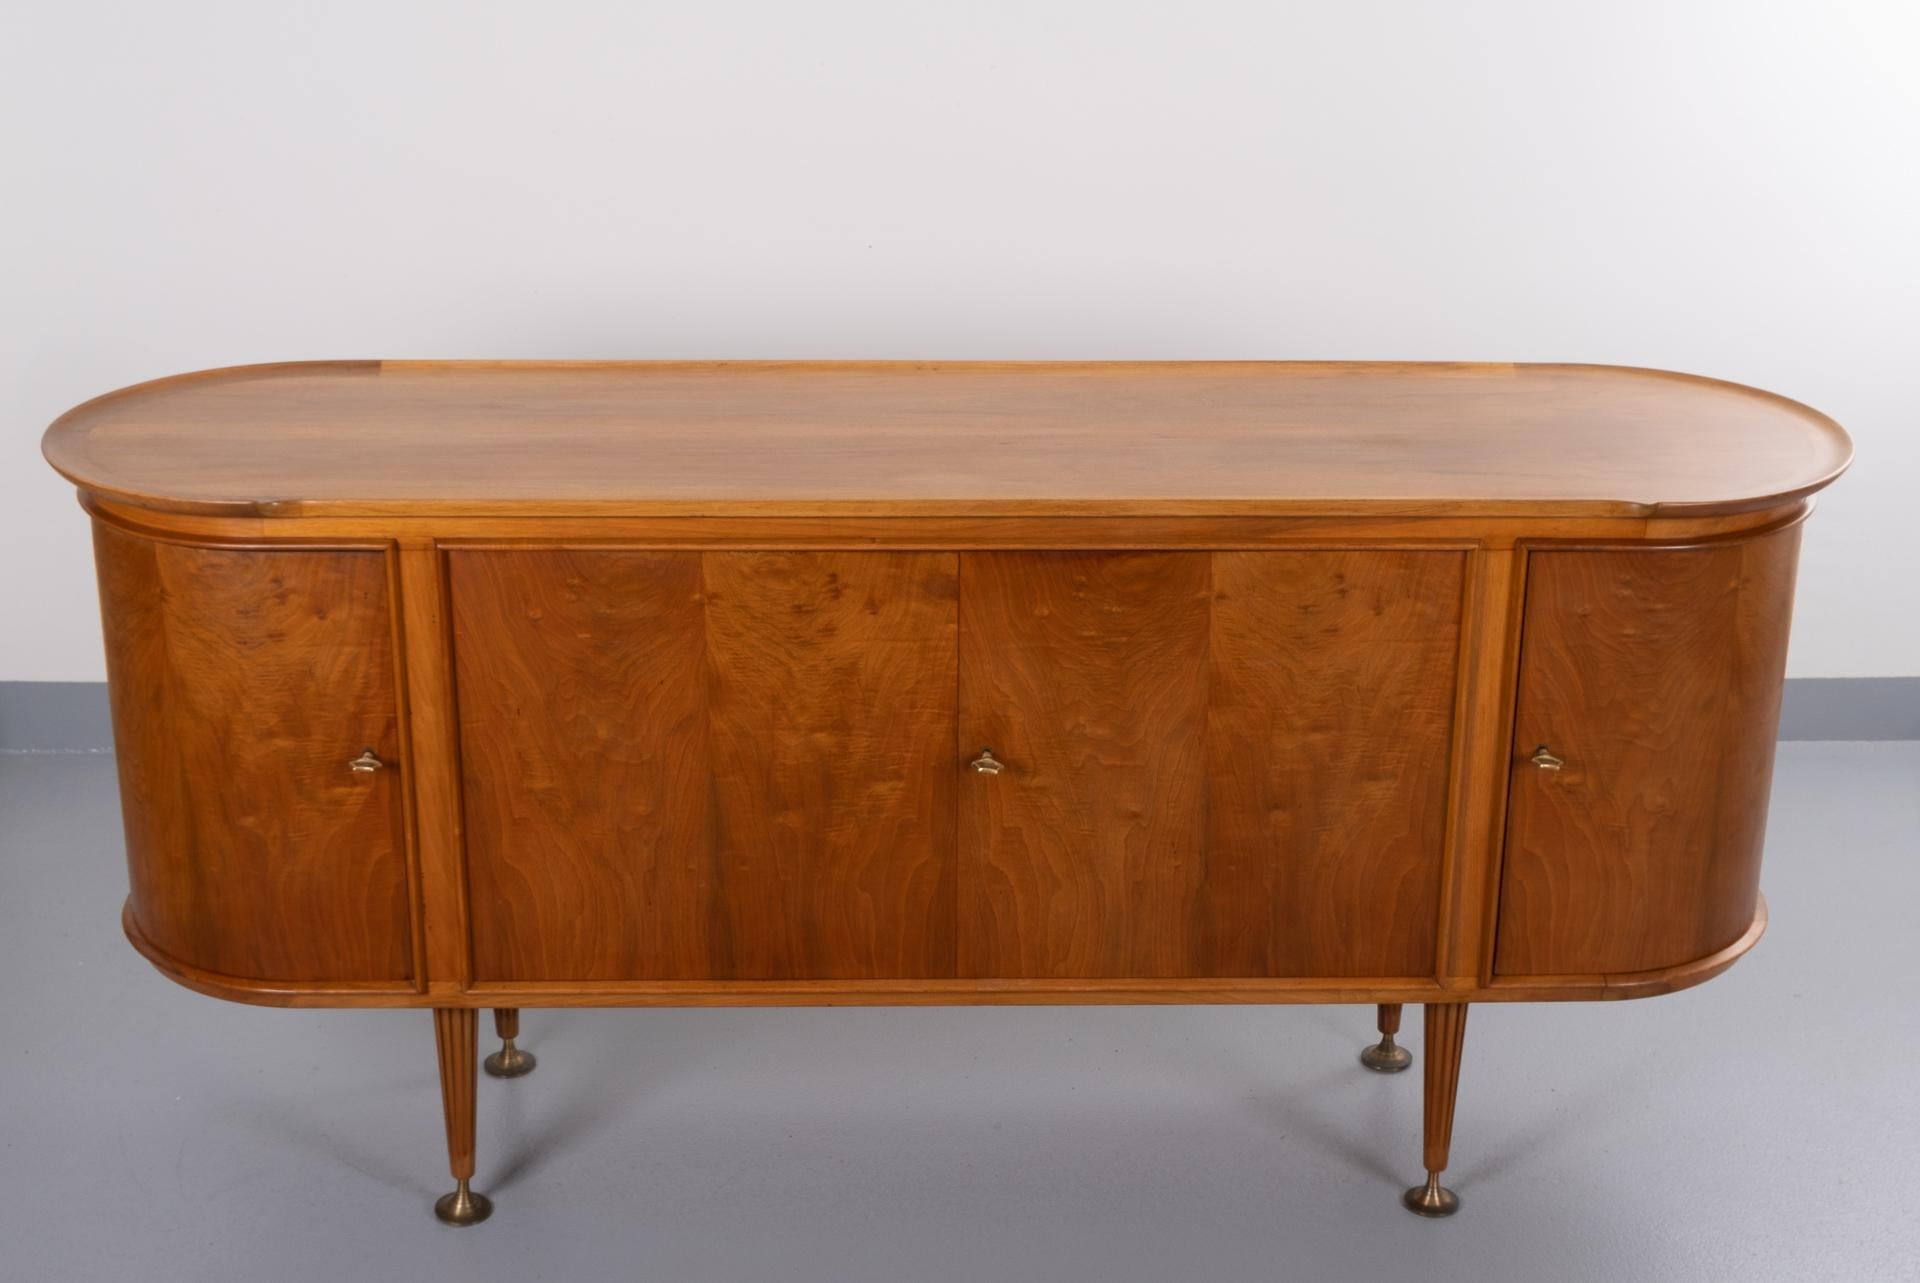 Nutwood Abraham A Patijn Sideboard Poly Z Series, 1950s